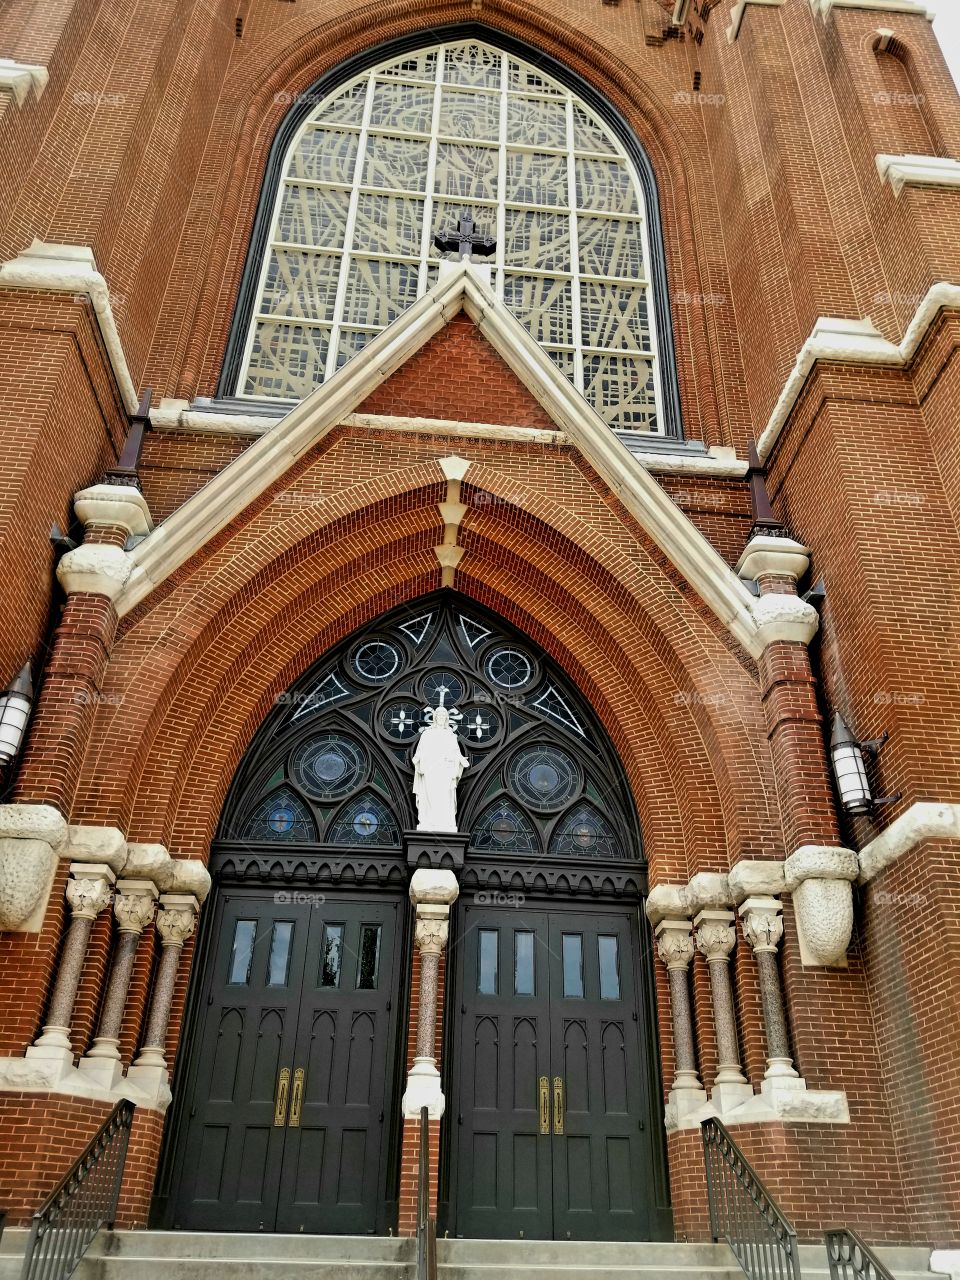 the great entrance to an 1870's Catholic church, absolutely stunning